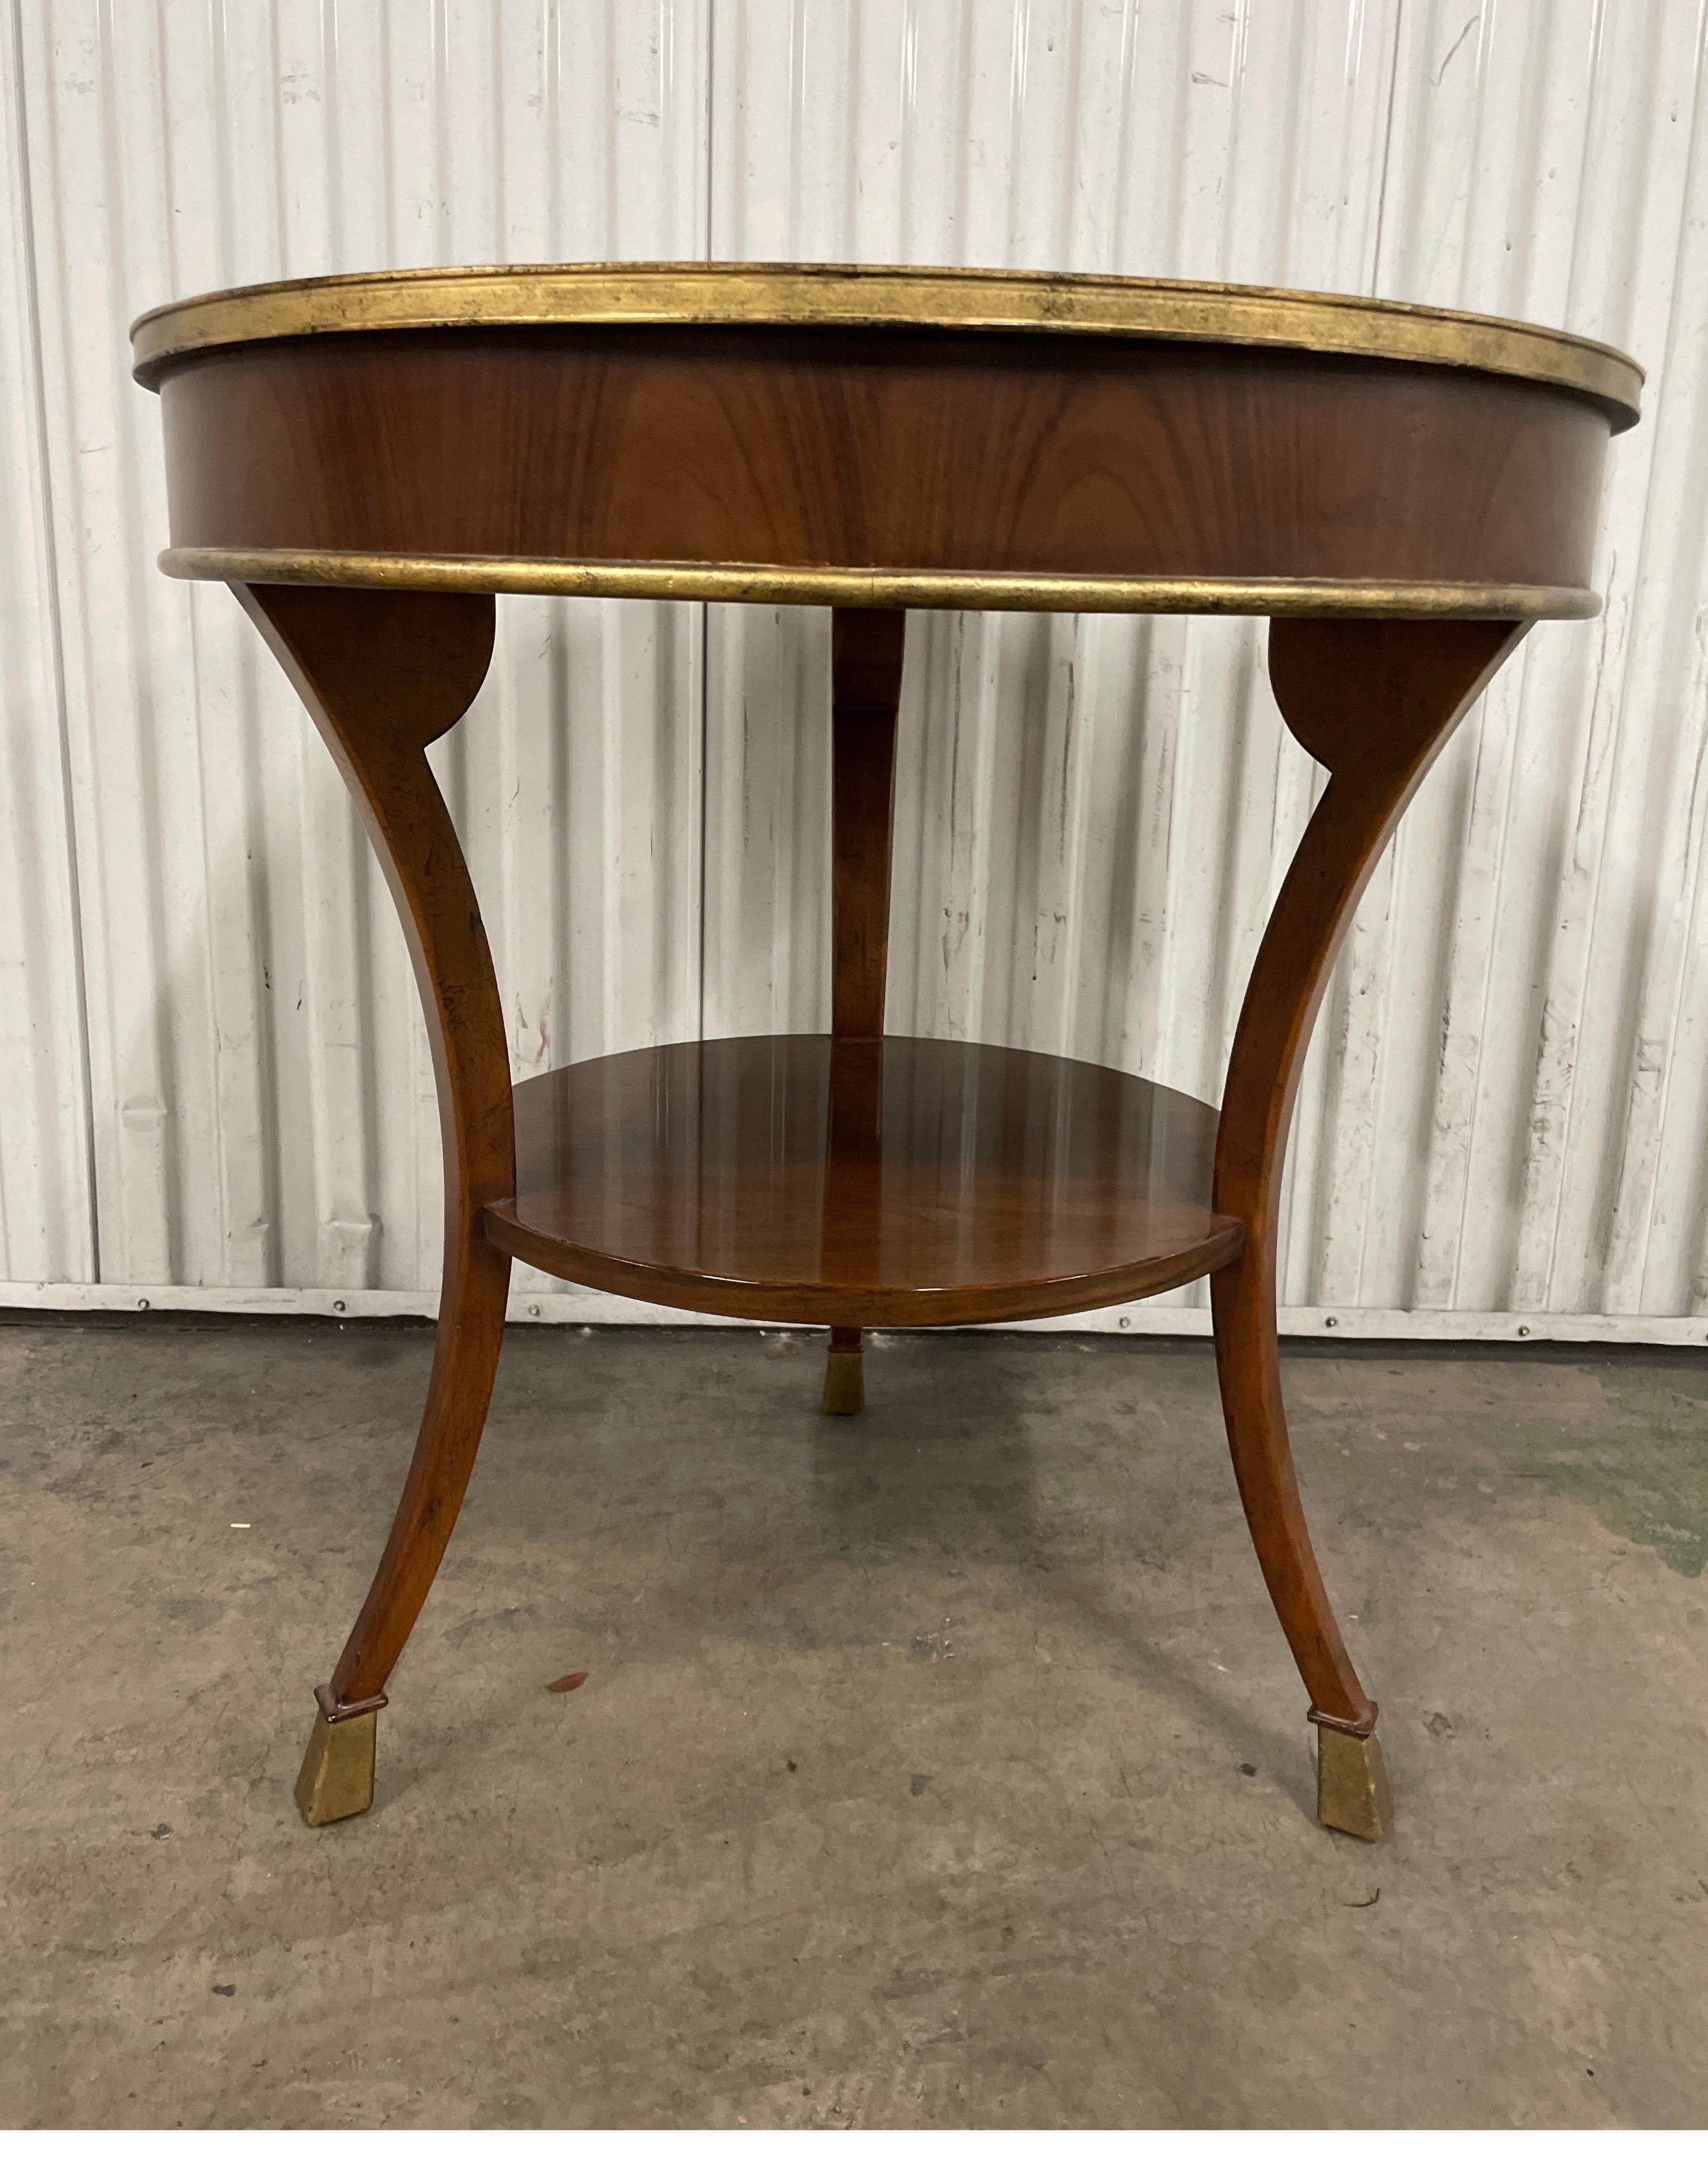 Round two-tiered Art Deco style side table by Baker Furniture Company. Gilded rims & feet.